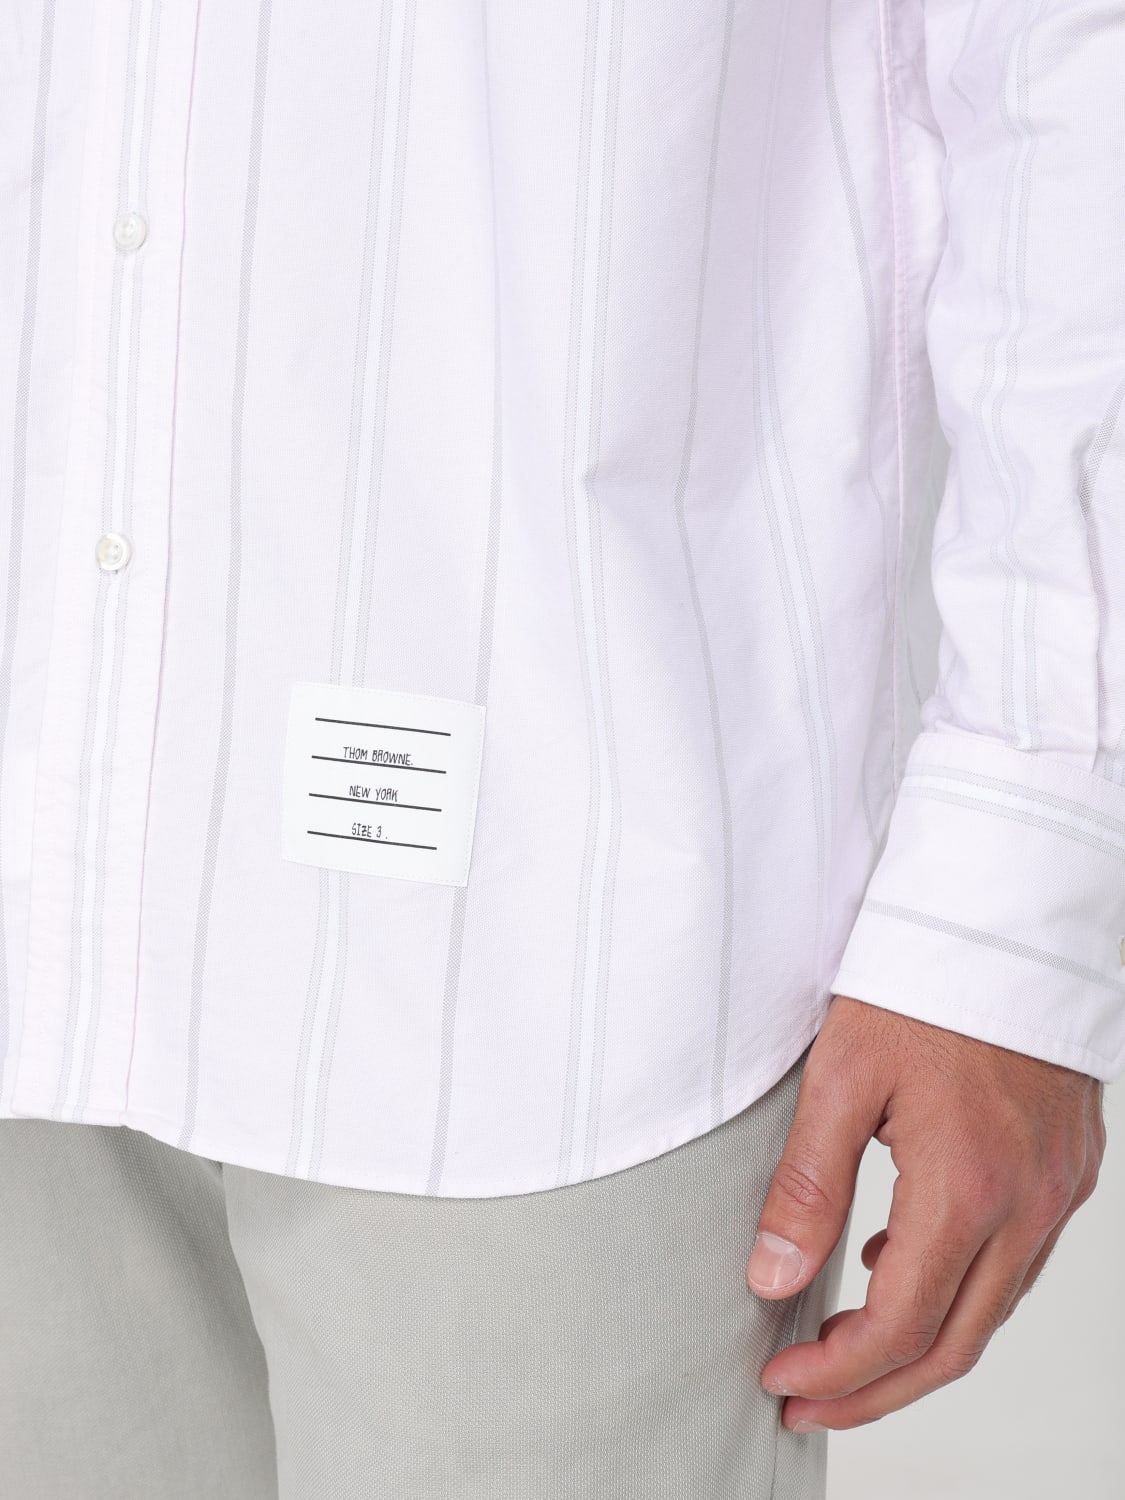 Thom Browne shirt in cotton